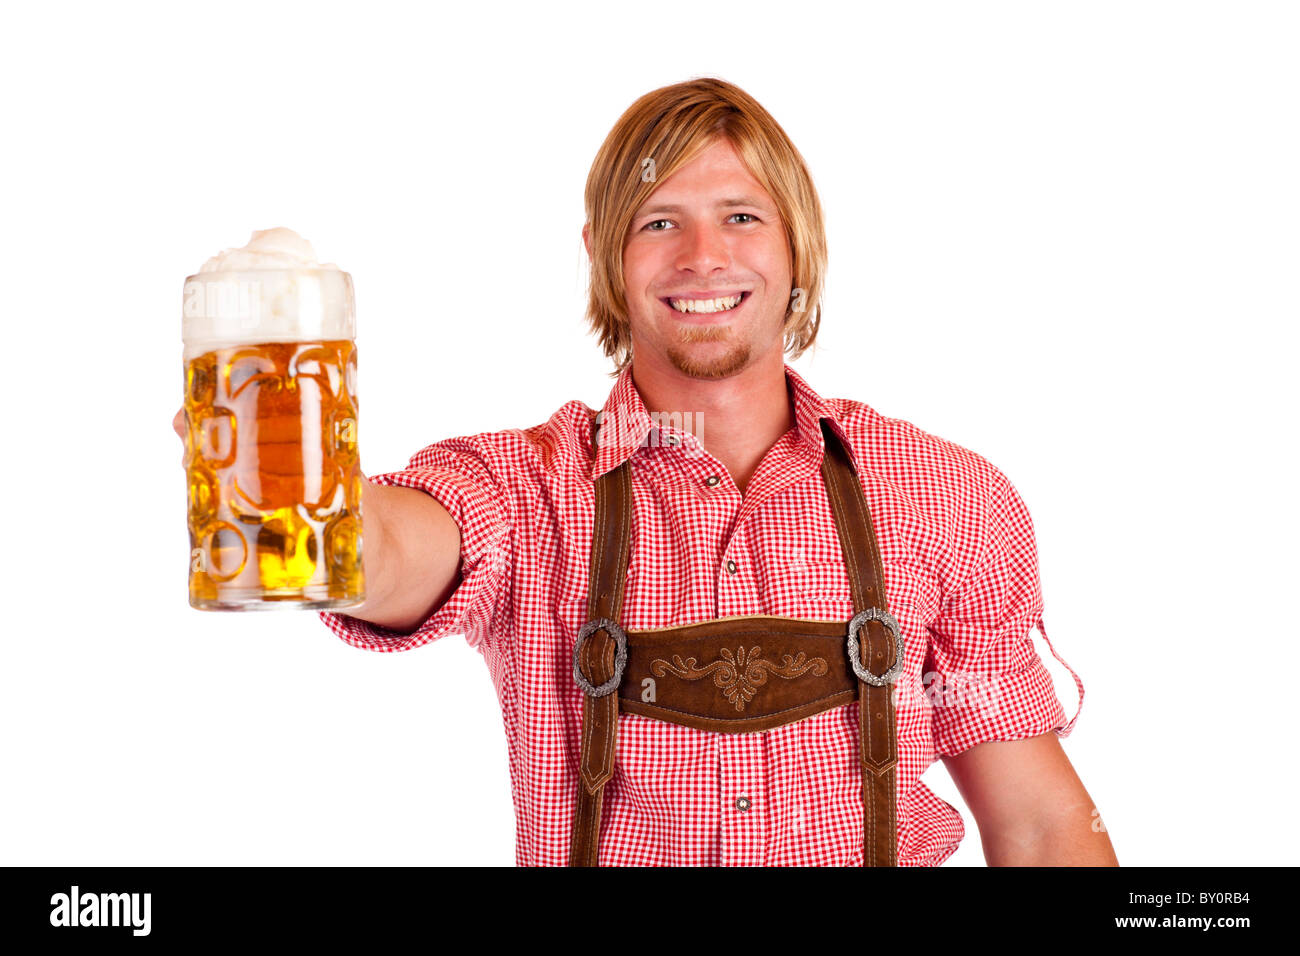 Happy smiling man with leather trousers (lederhose) holds oktoberfest beer stein. Isolated on white background. Stock Photo